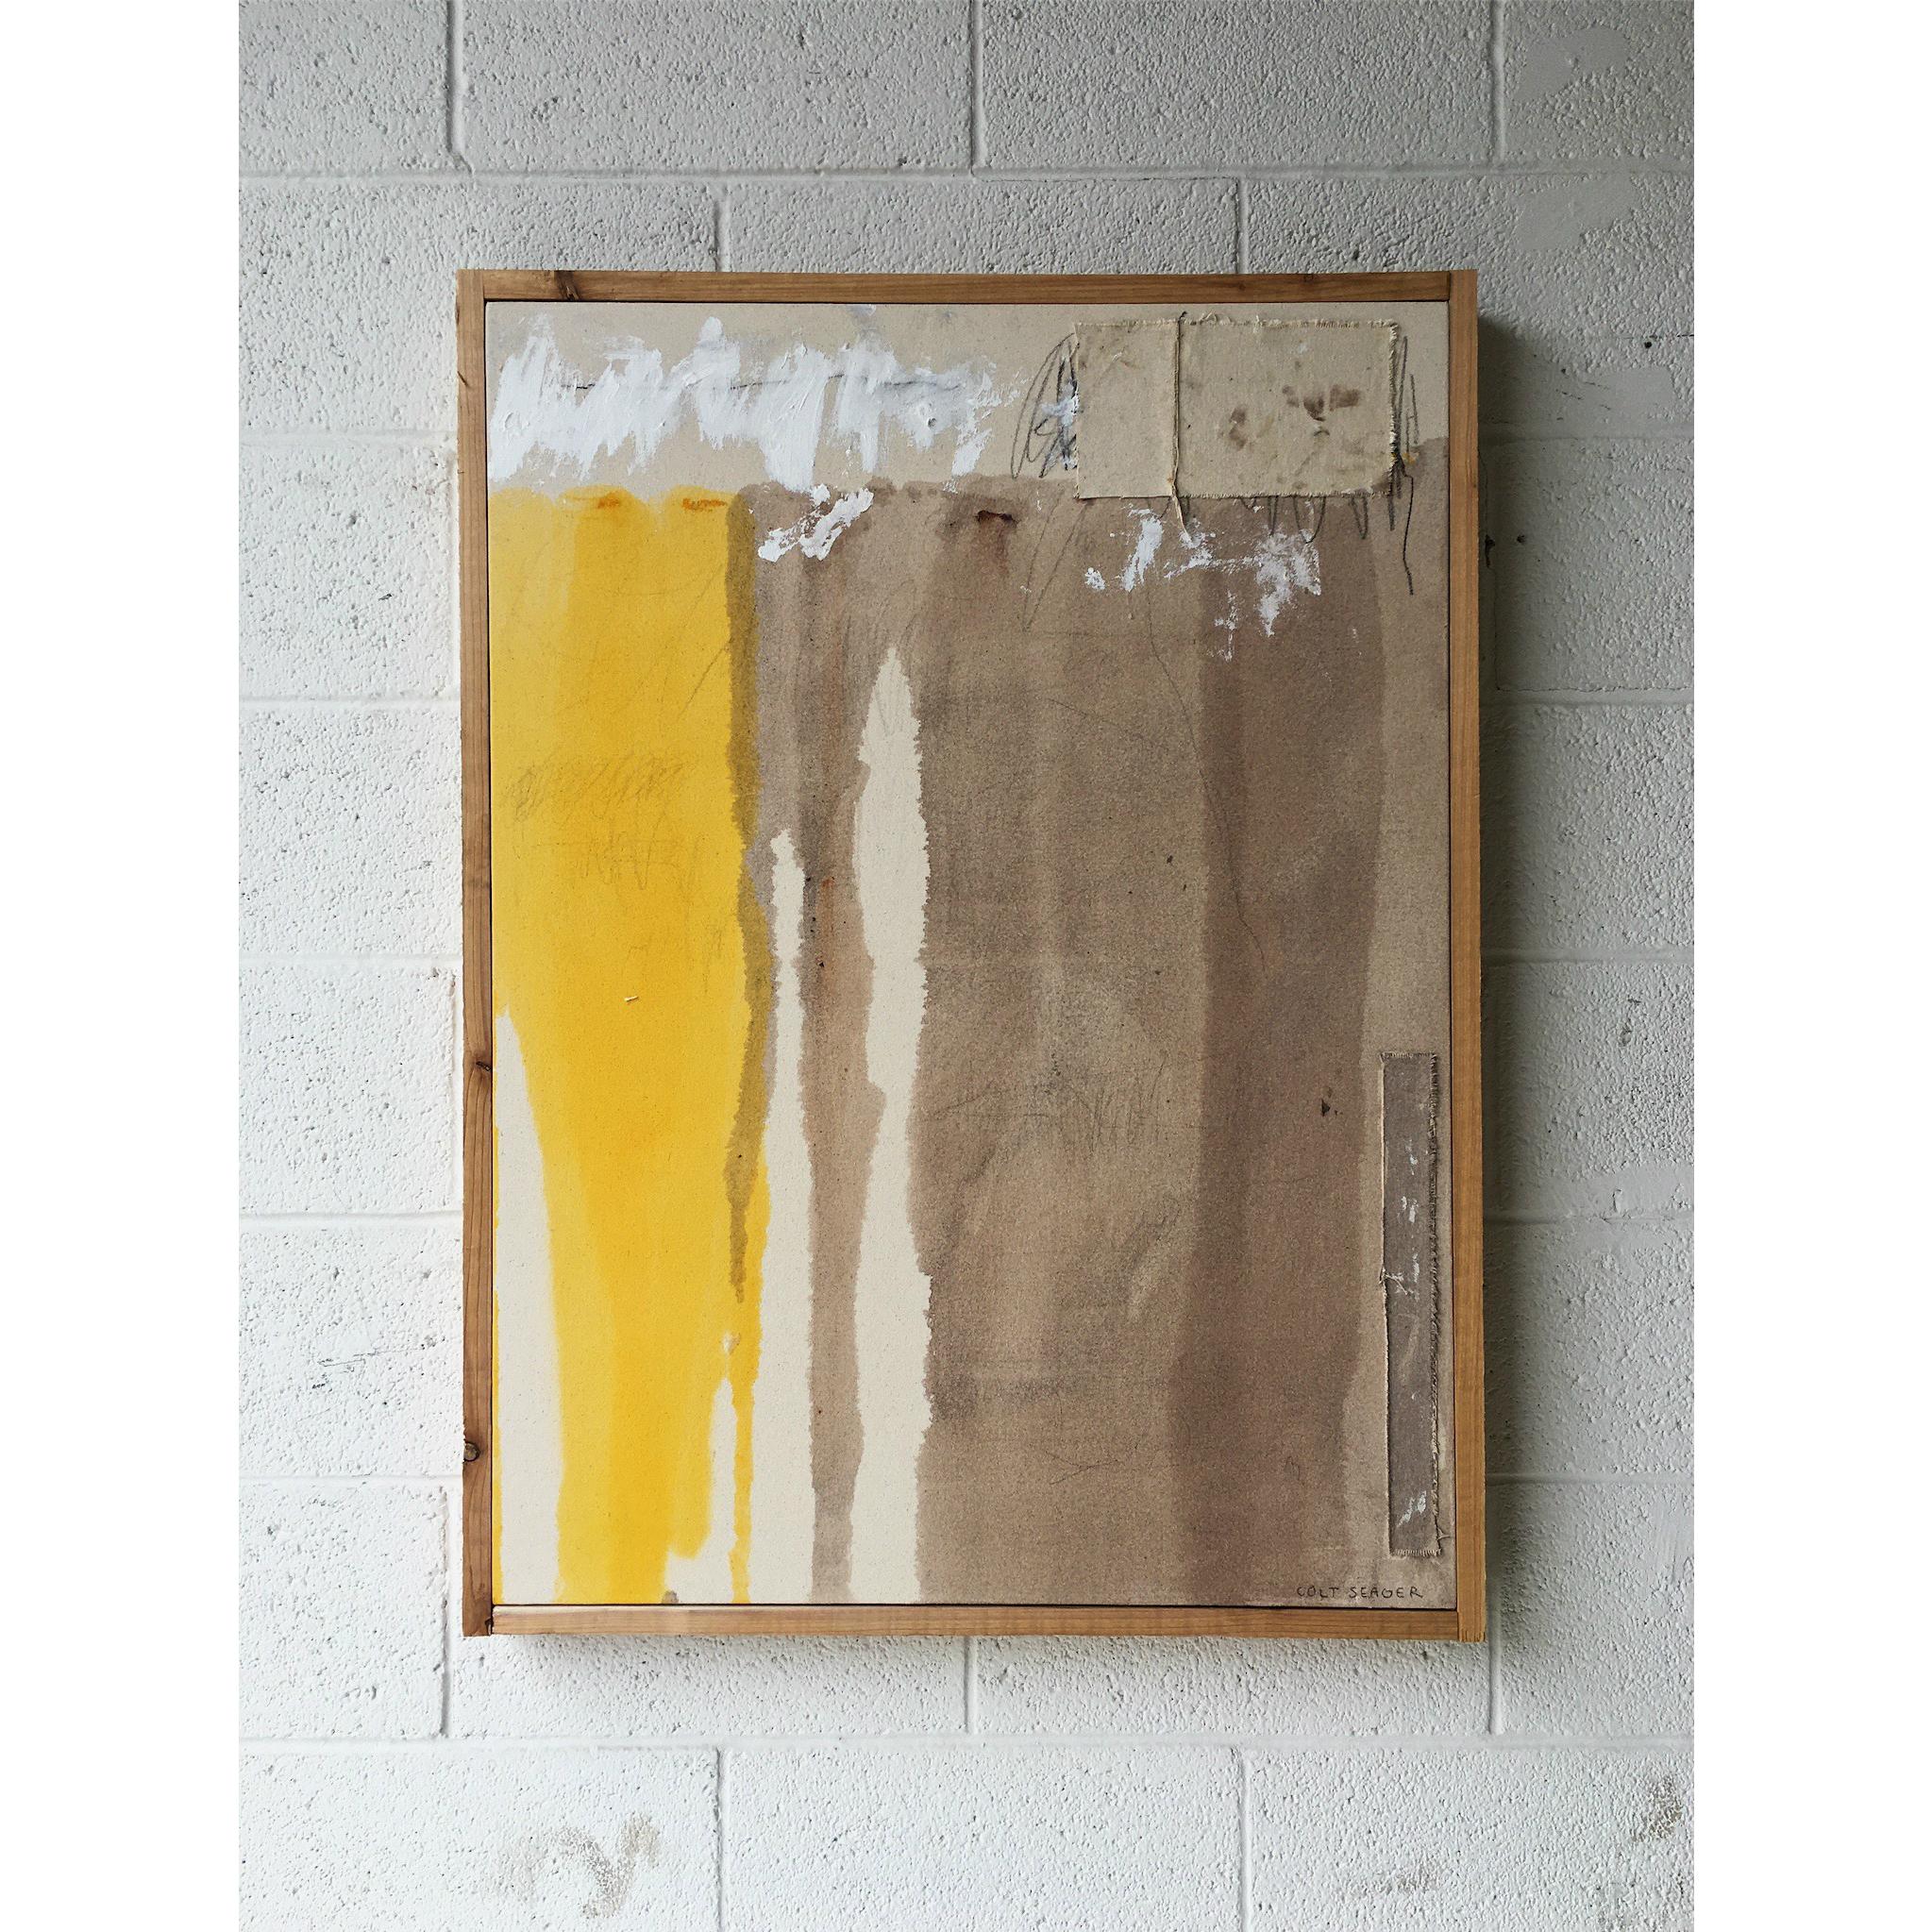 Oil, acrylic, charcoal, and pencil on canvas framed in cedar.

Colt Seager is an internationally recognized artist who resides in the suburbs of Chicago. Working primarily in the mediums of painting and sculpture, his art seeks to invite others